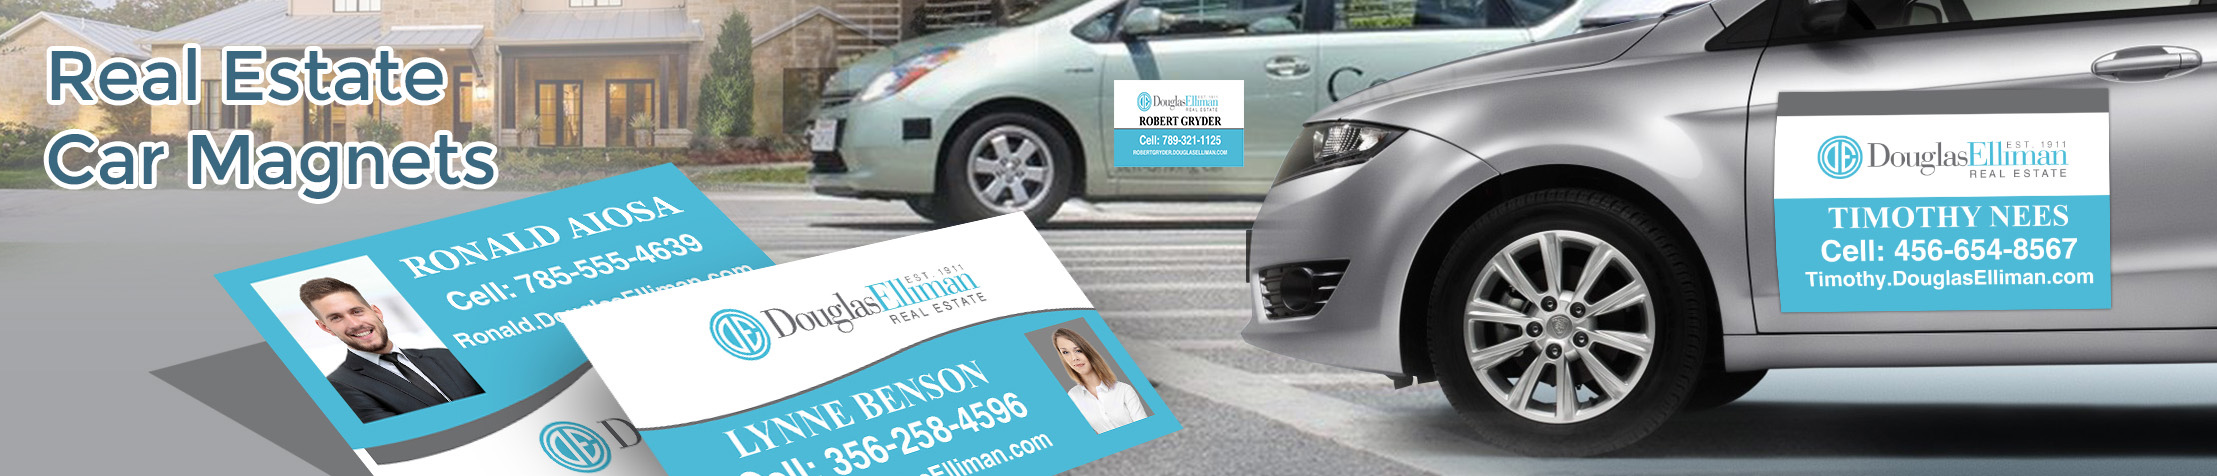 Douglas Elliman Real Estate Car Magnets - Douglas Elliman Real Estate custom car magnets for realtors, with or without photo | BestPrintBuy.com